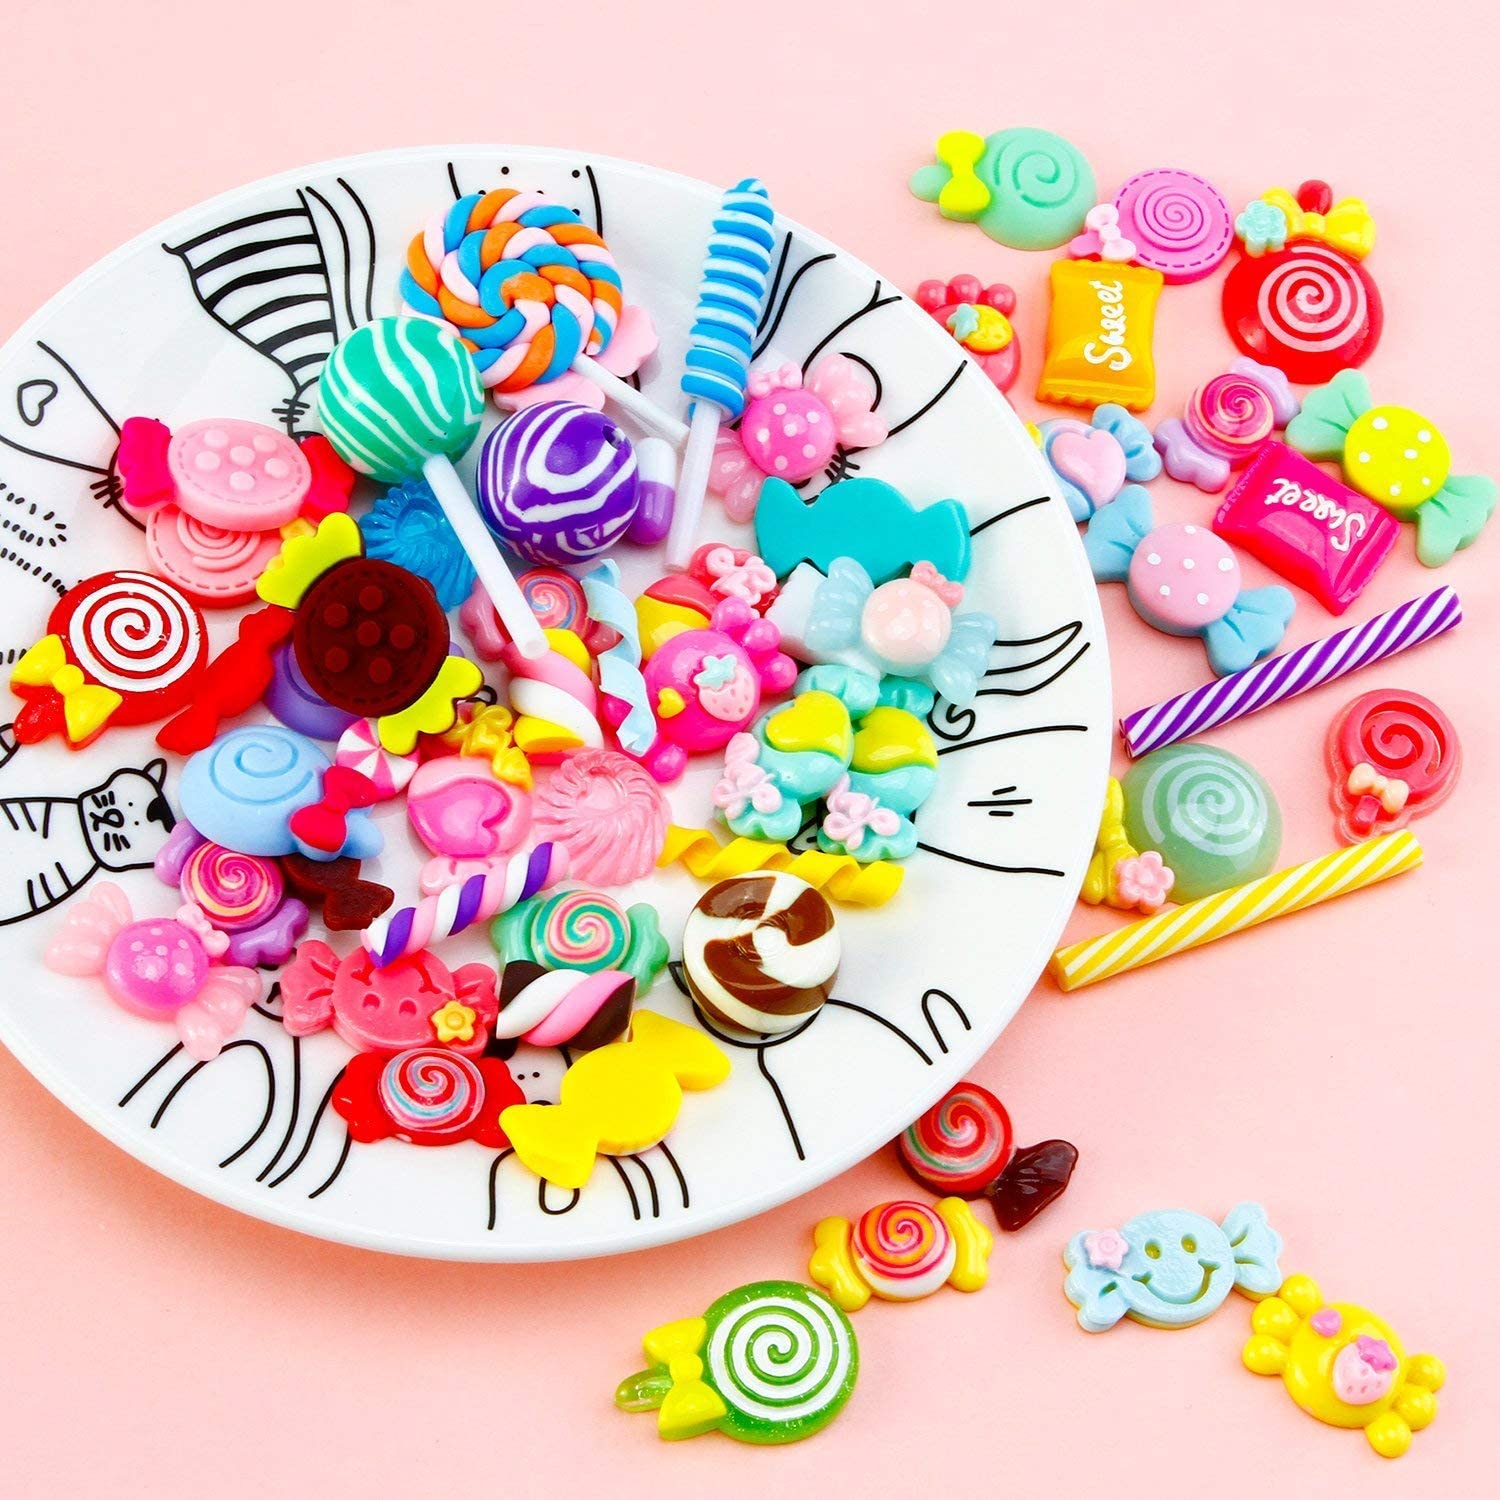 VONTER 60 Pieces Slime Charms Set Candy Sweets Charms Mixed Flatback Resin Charms for Slime DIY Crafts Accessories Scrapbooking Slime Charms Mixed Resin Flatback Slime Beads Making Supplies - image 2 of 8